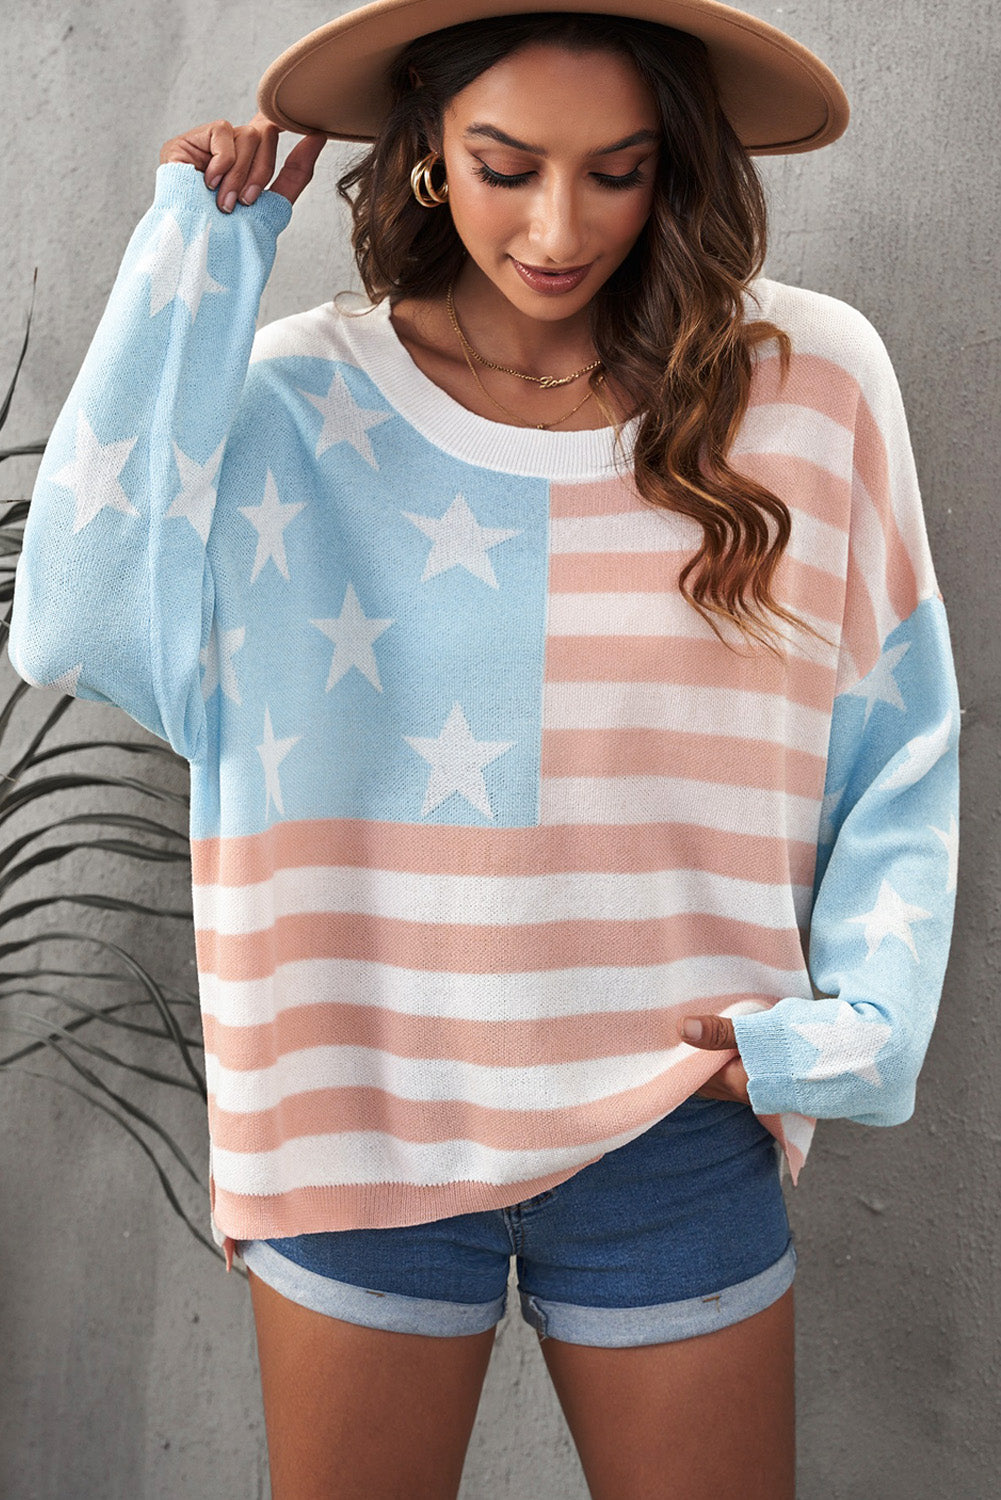 Stand for the Flag Knit Pullover